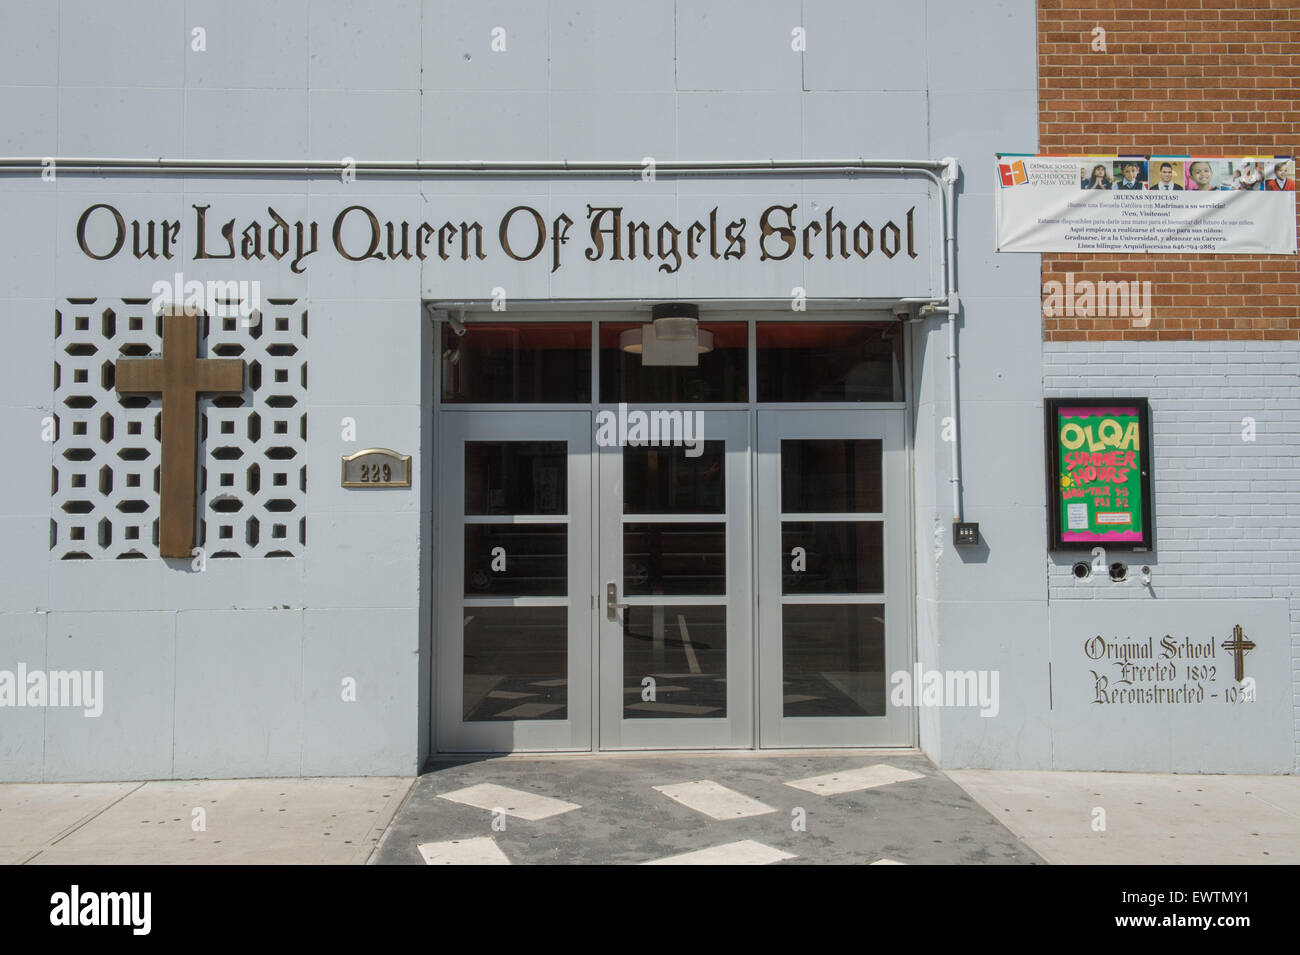 New York, New York, USA. 30th June, 2015. Our Lady Queen of Angels parochial school in East Harlem, which Pope Francis is scheduled to visit while in September while New York. This school on East 112th Street, which has students in prekindergarten through eighth grade, is an example of excellence in providing schooling for inner-city students, according to a spokesman for the Archdiocese of New York. The church and school have a checkered past because of financial struggles; at one point beginning in the first decade of this century, the church was closed for more than two years. The communit Stock Photo